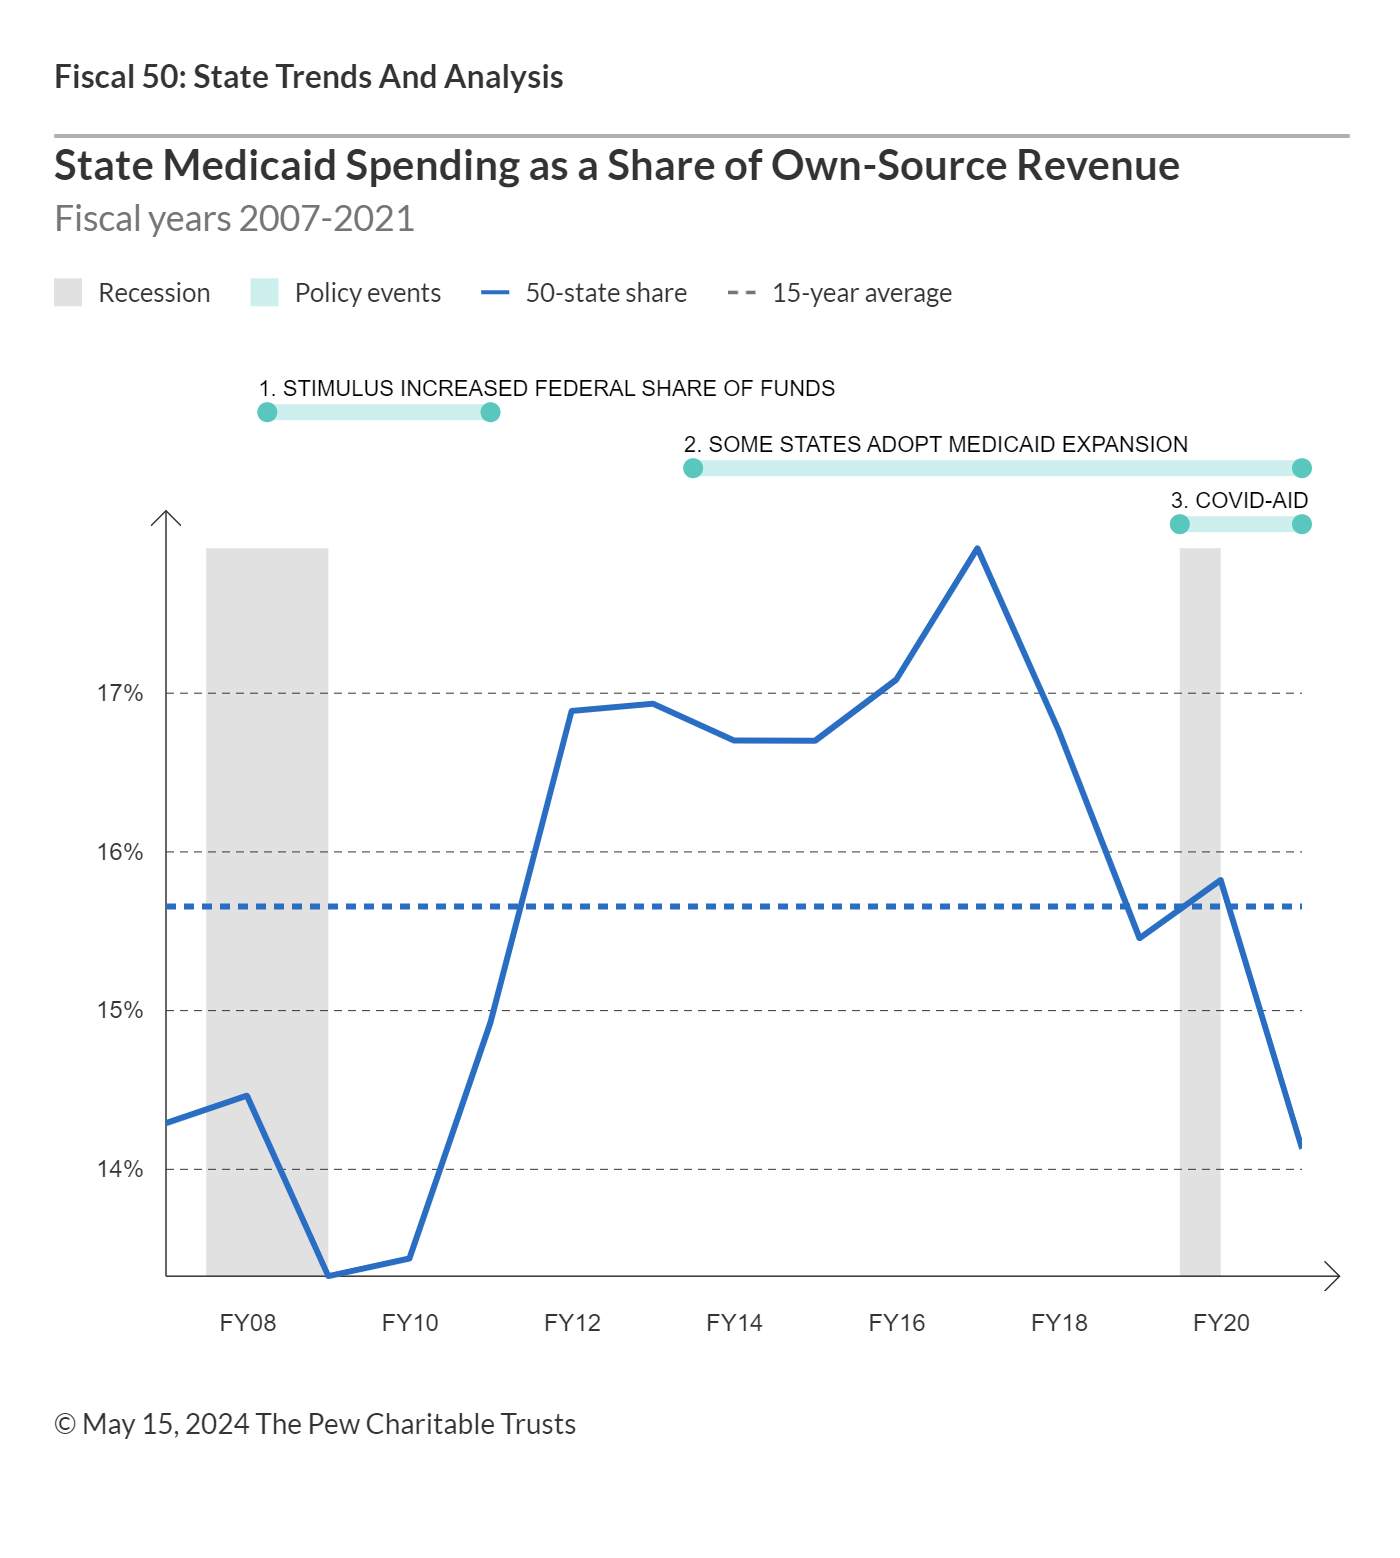 State Medicaid Spending as a Share of Own-Source Revenue